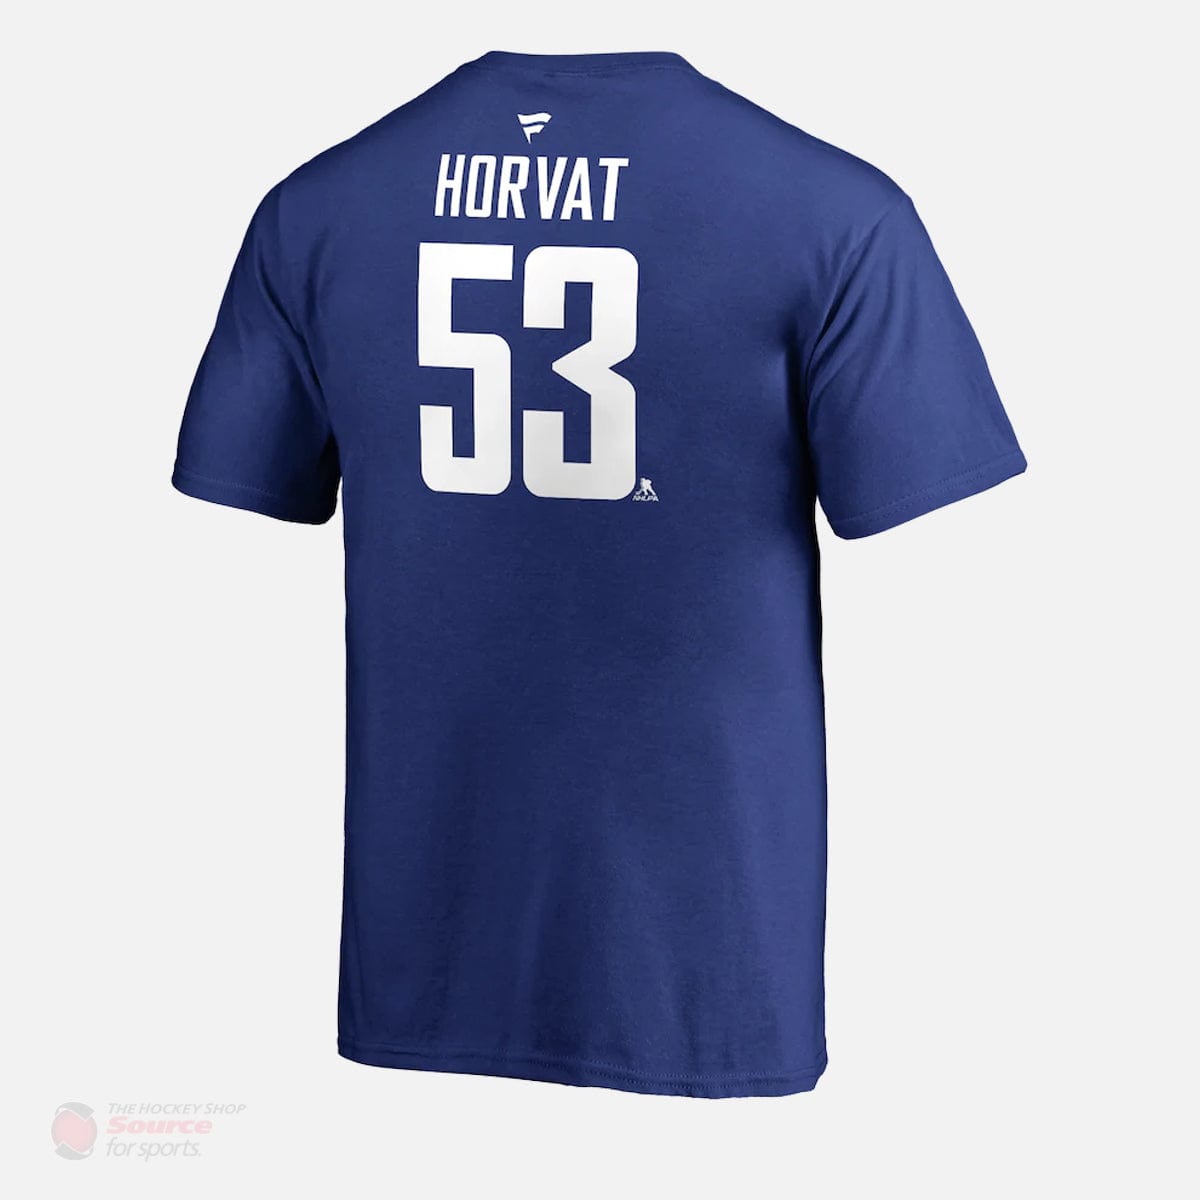 Vancouver Canucks Fanatics Authentic Name & Number Mens Shirt - Bo Horvat